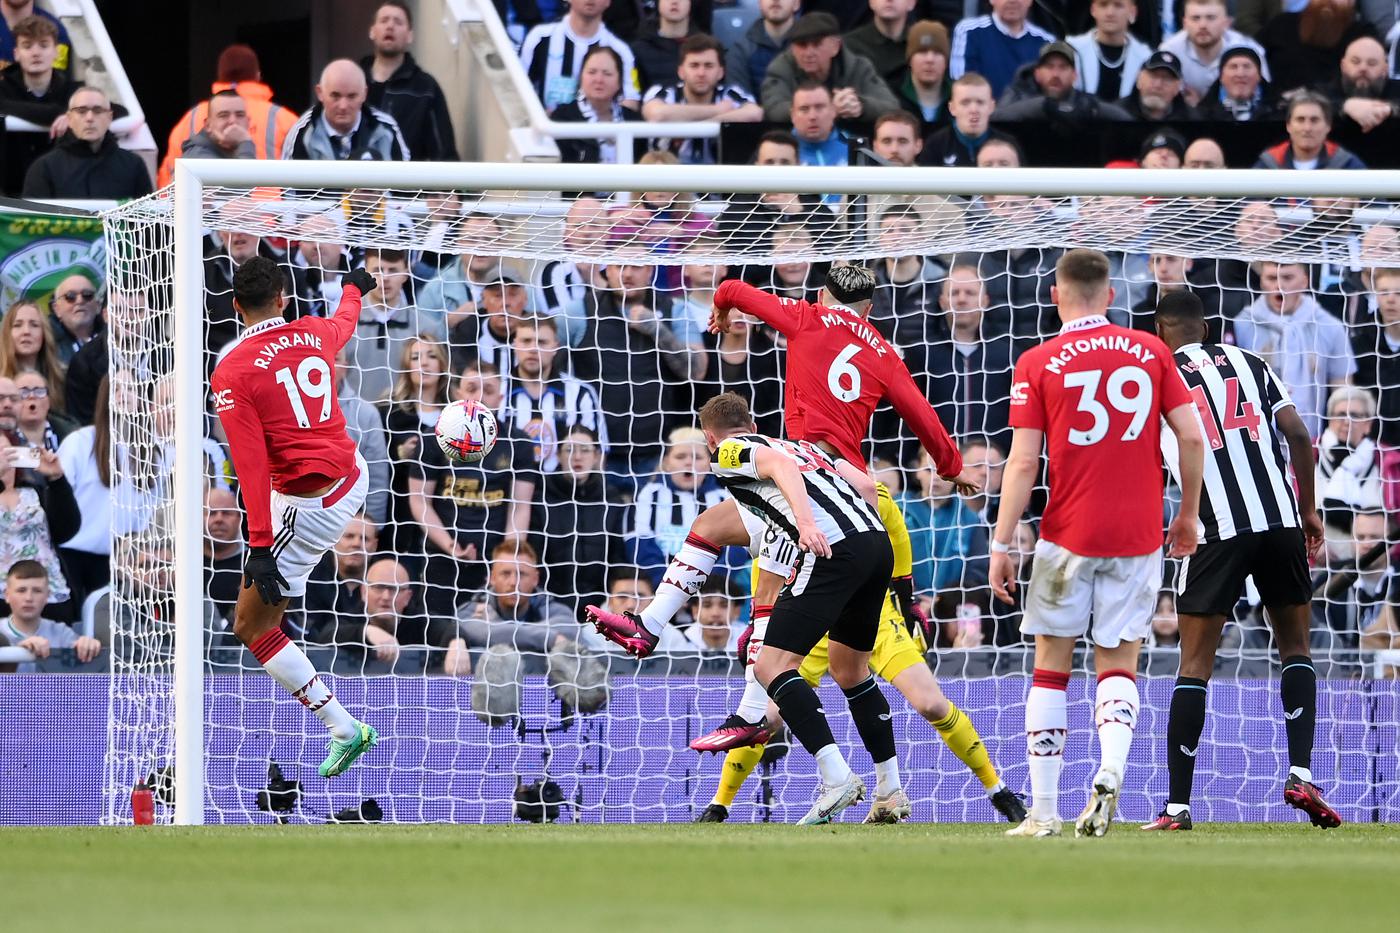 Newcastle - Man United - 2:0. Championship of England, 29th round. Match review, statistics